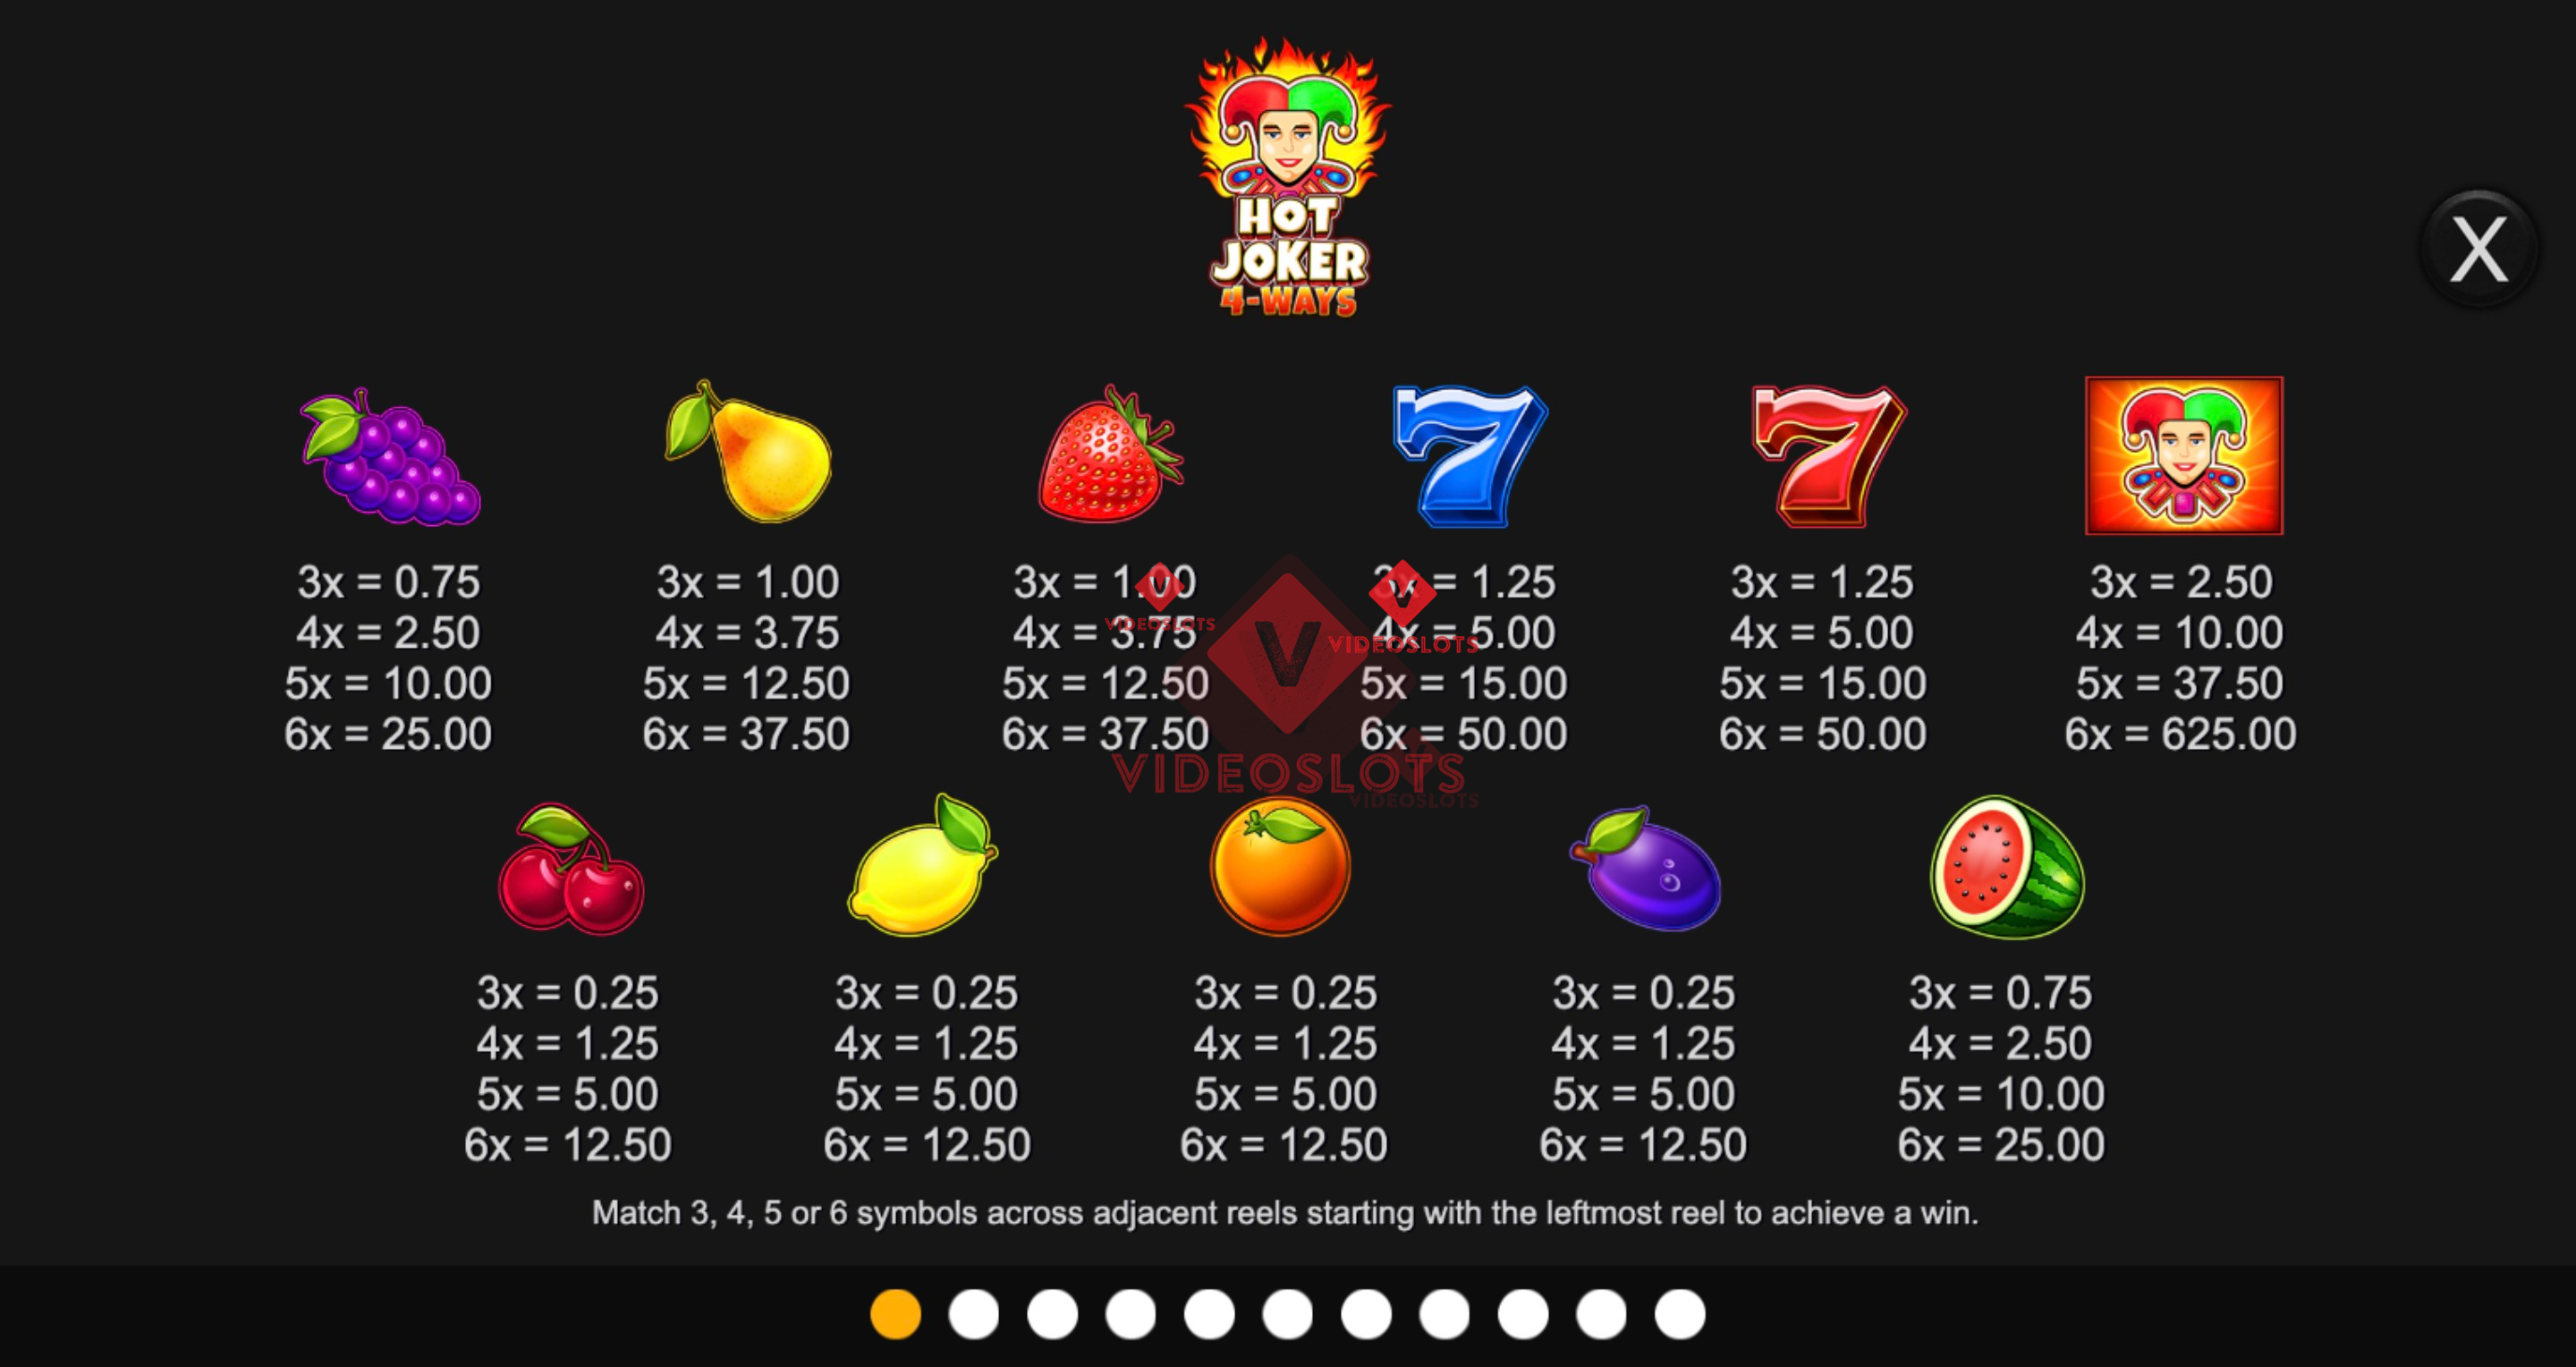 Pay Table for Hot Joker 4 Ways slot from Inspired Gaming